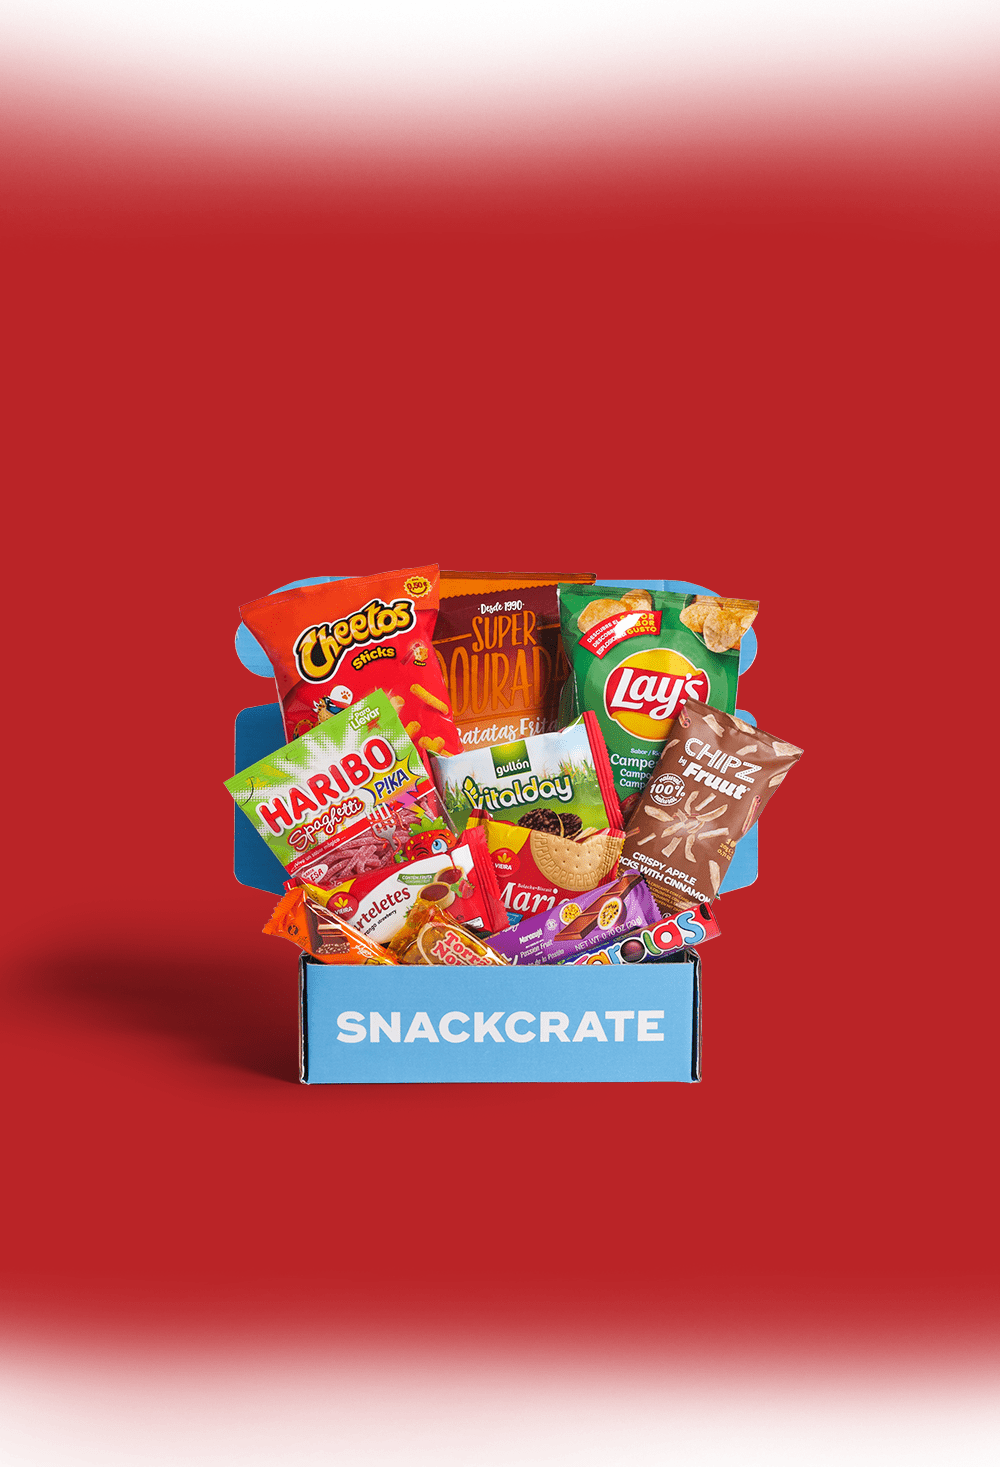 Portugal snackcrate full of foreign snacks